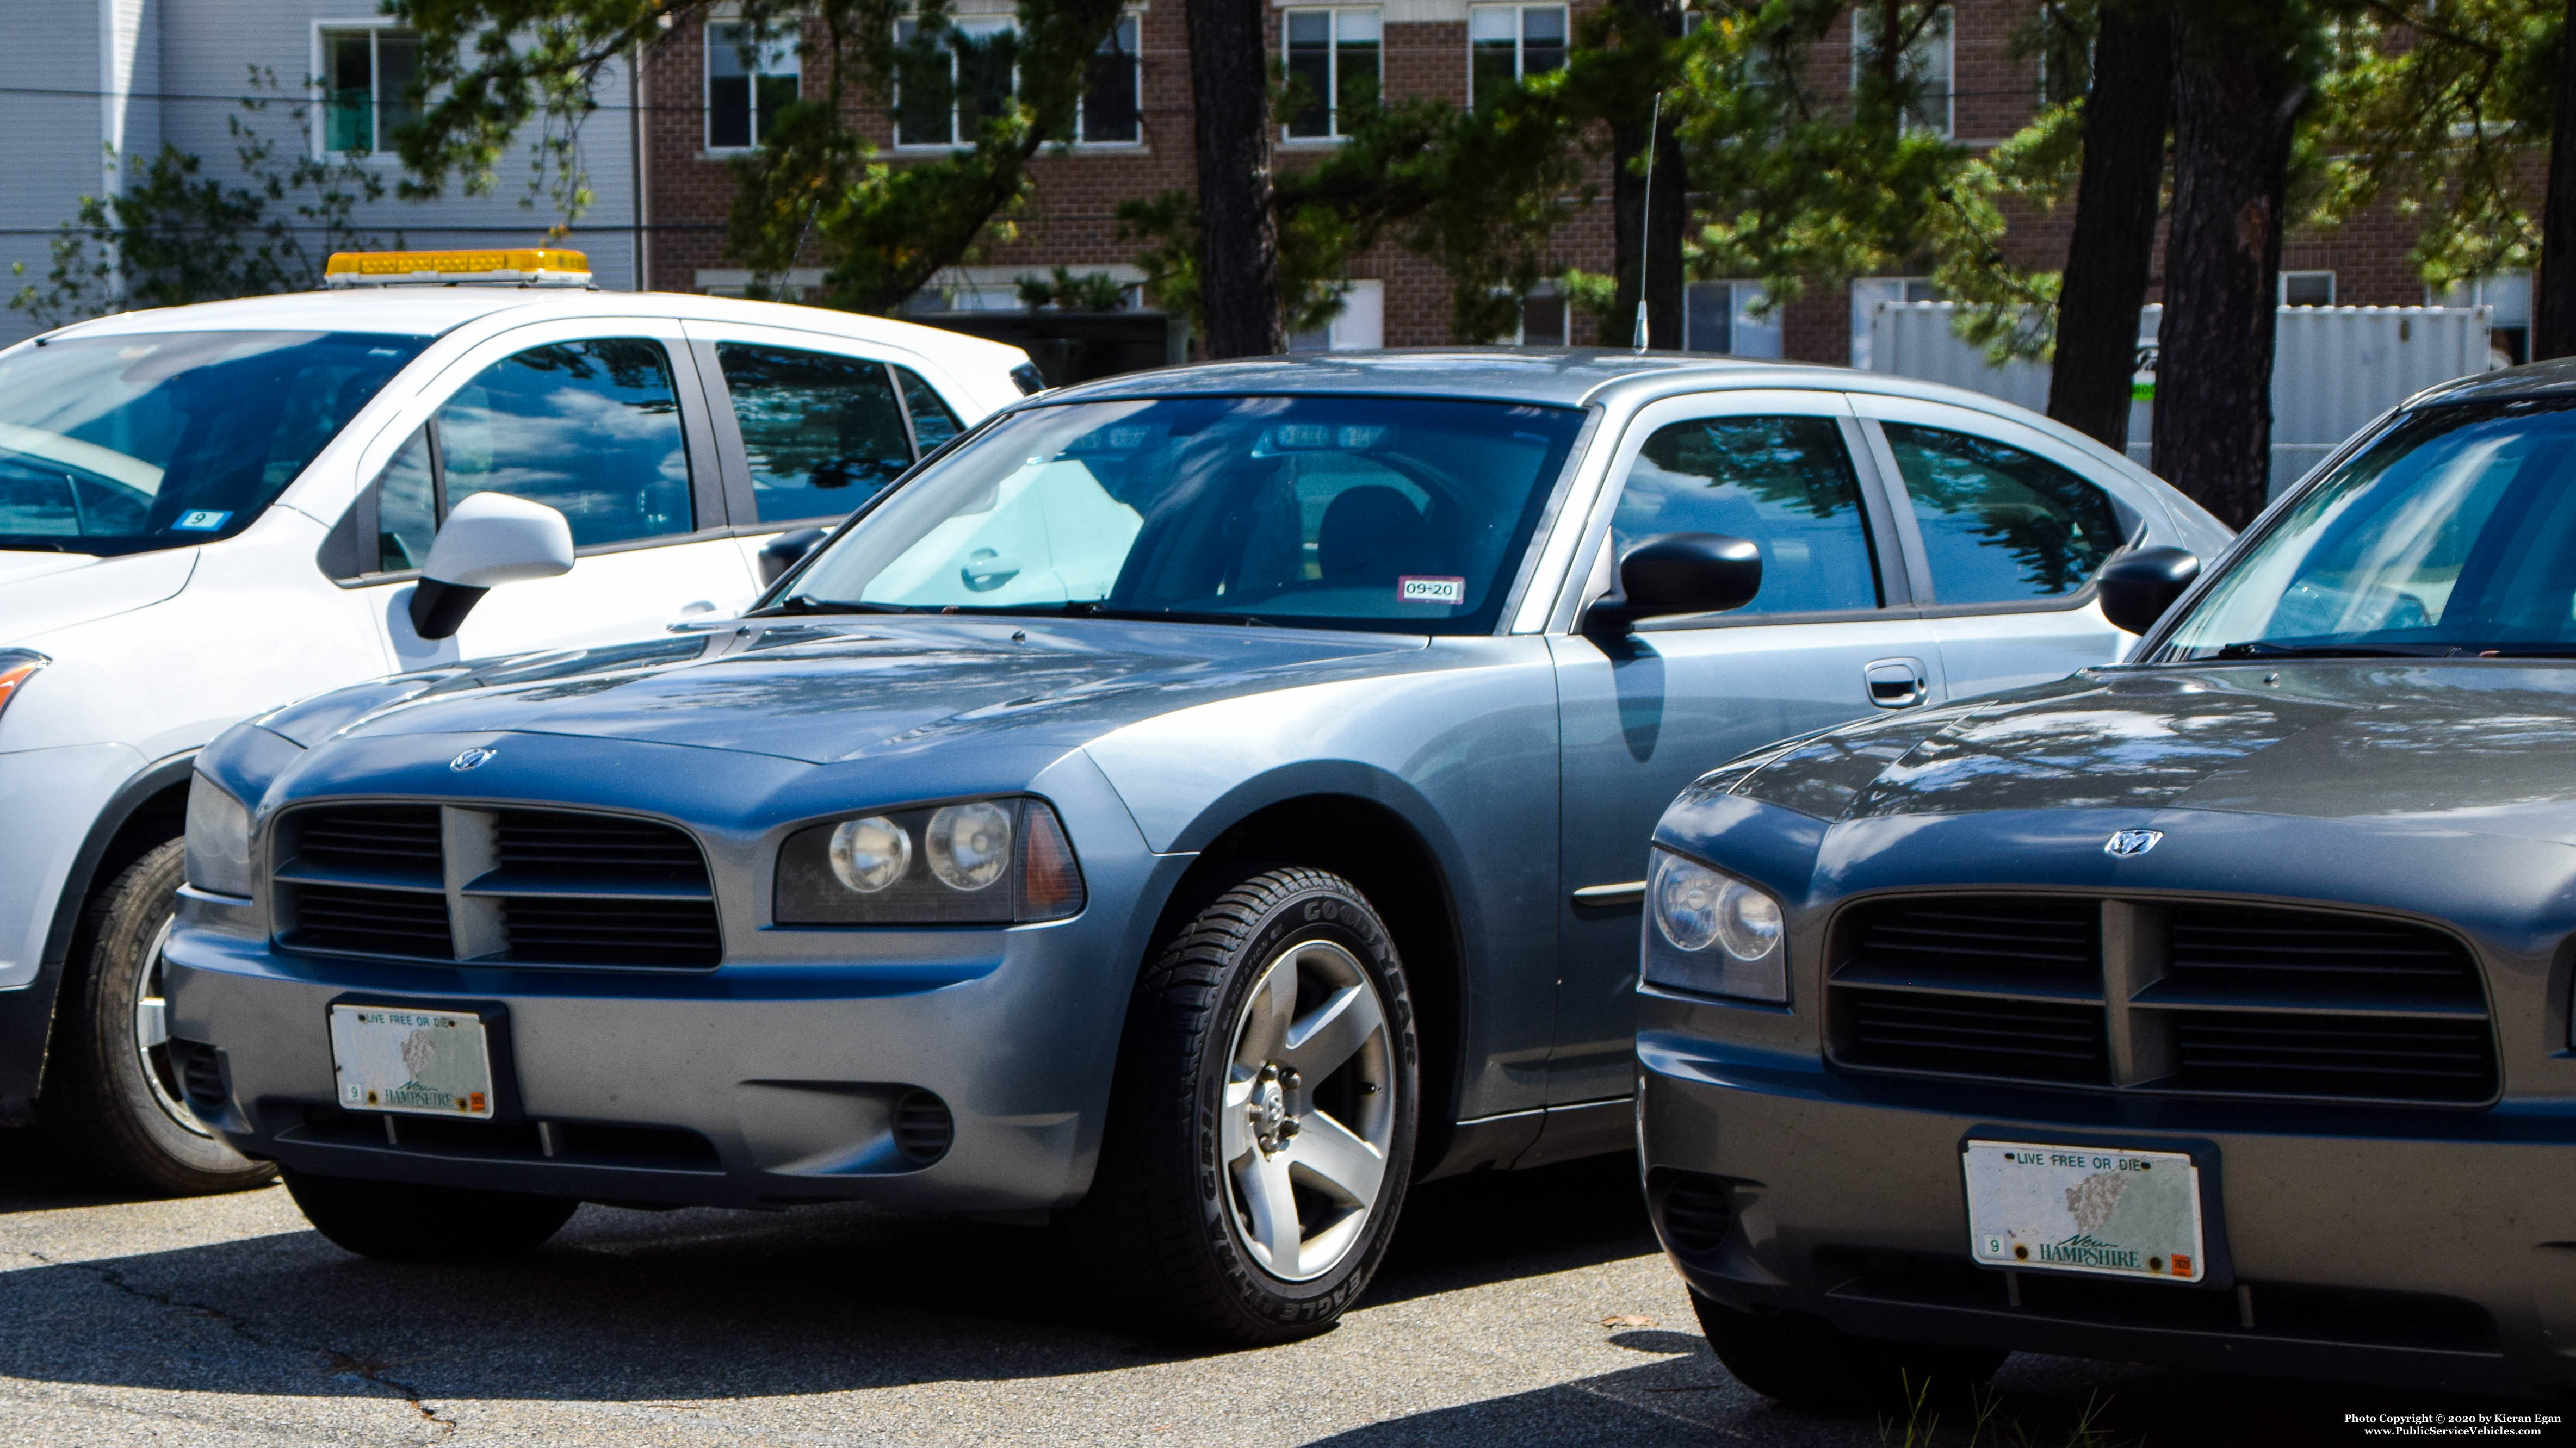 A photo  of New Hampshire State Police
            Unmarked Unit, a 2006-2010 Dodge Charger             taken by Kieran Egan